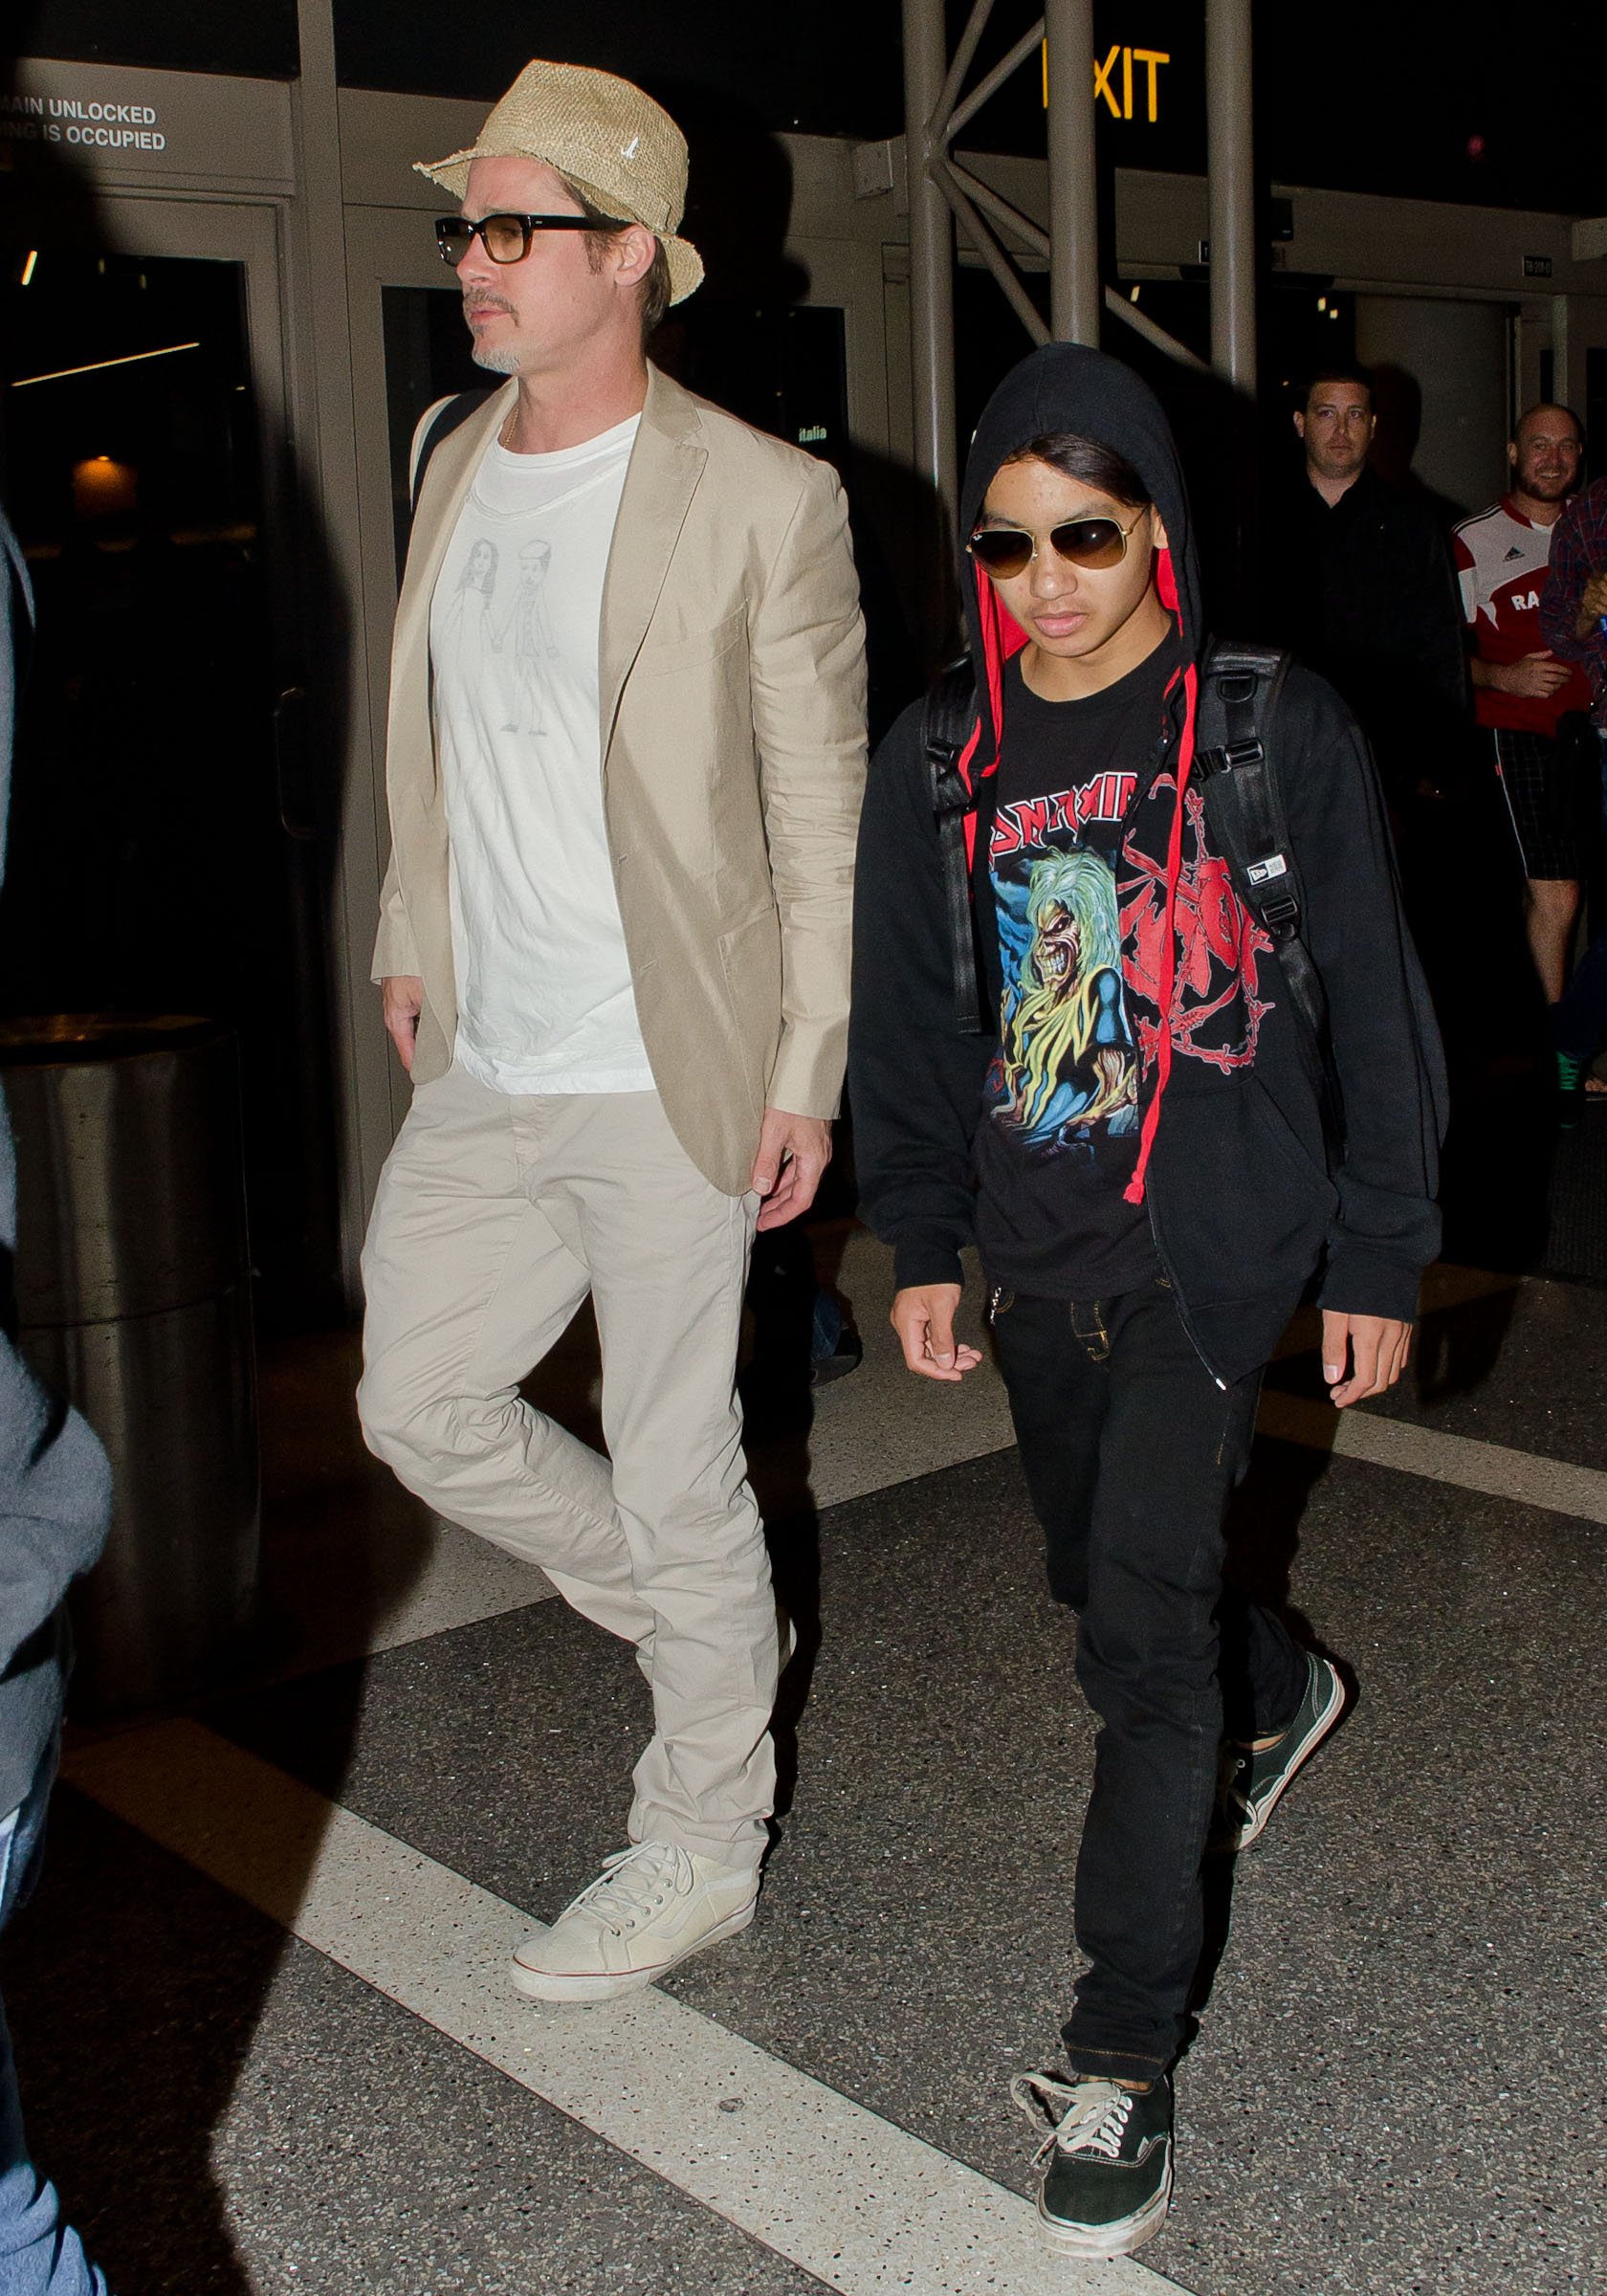 Brad Pitt and Maddox Jolie-Pitt are seen at LAX on June 06, 2014 in Los Angeles, California. | Source: Getty Images